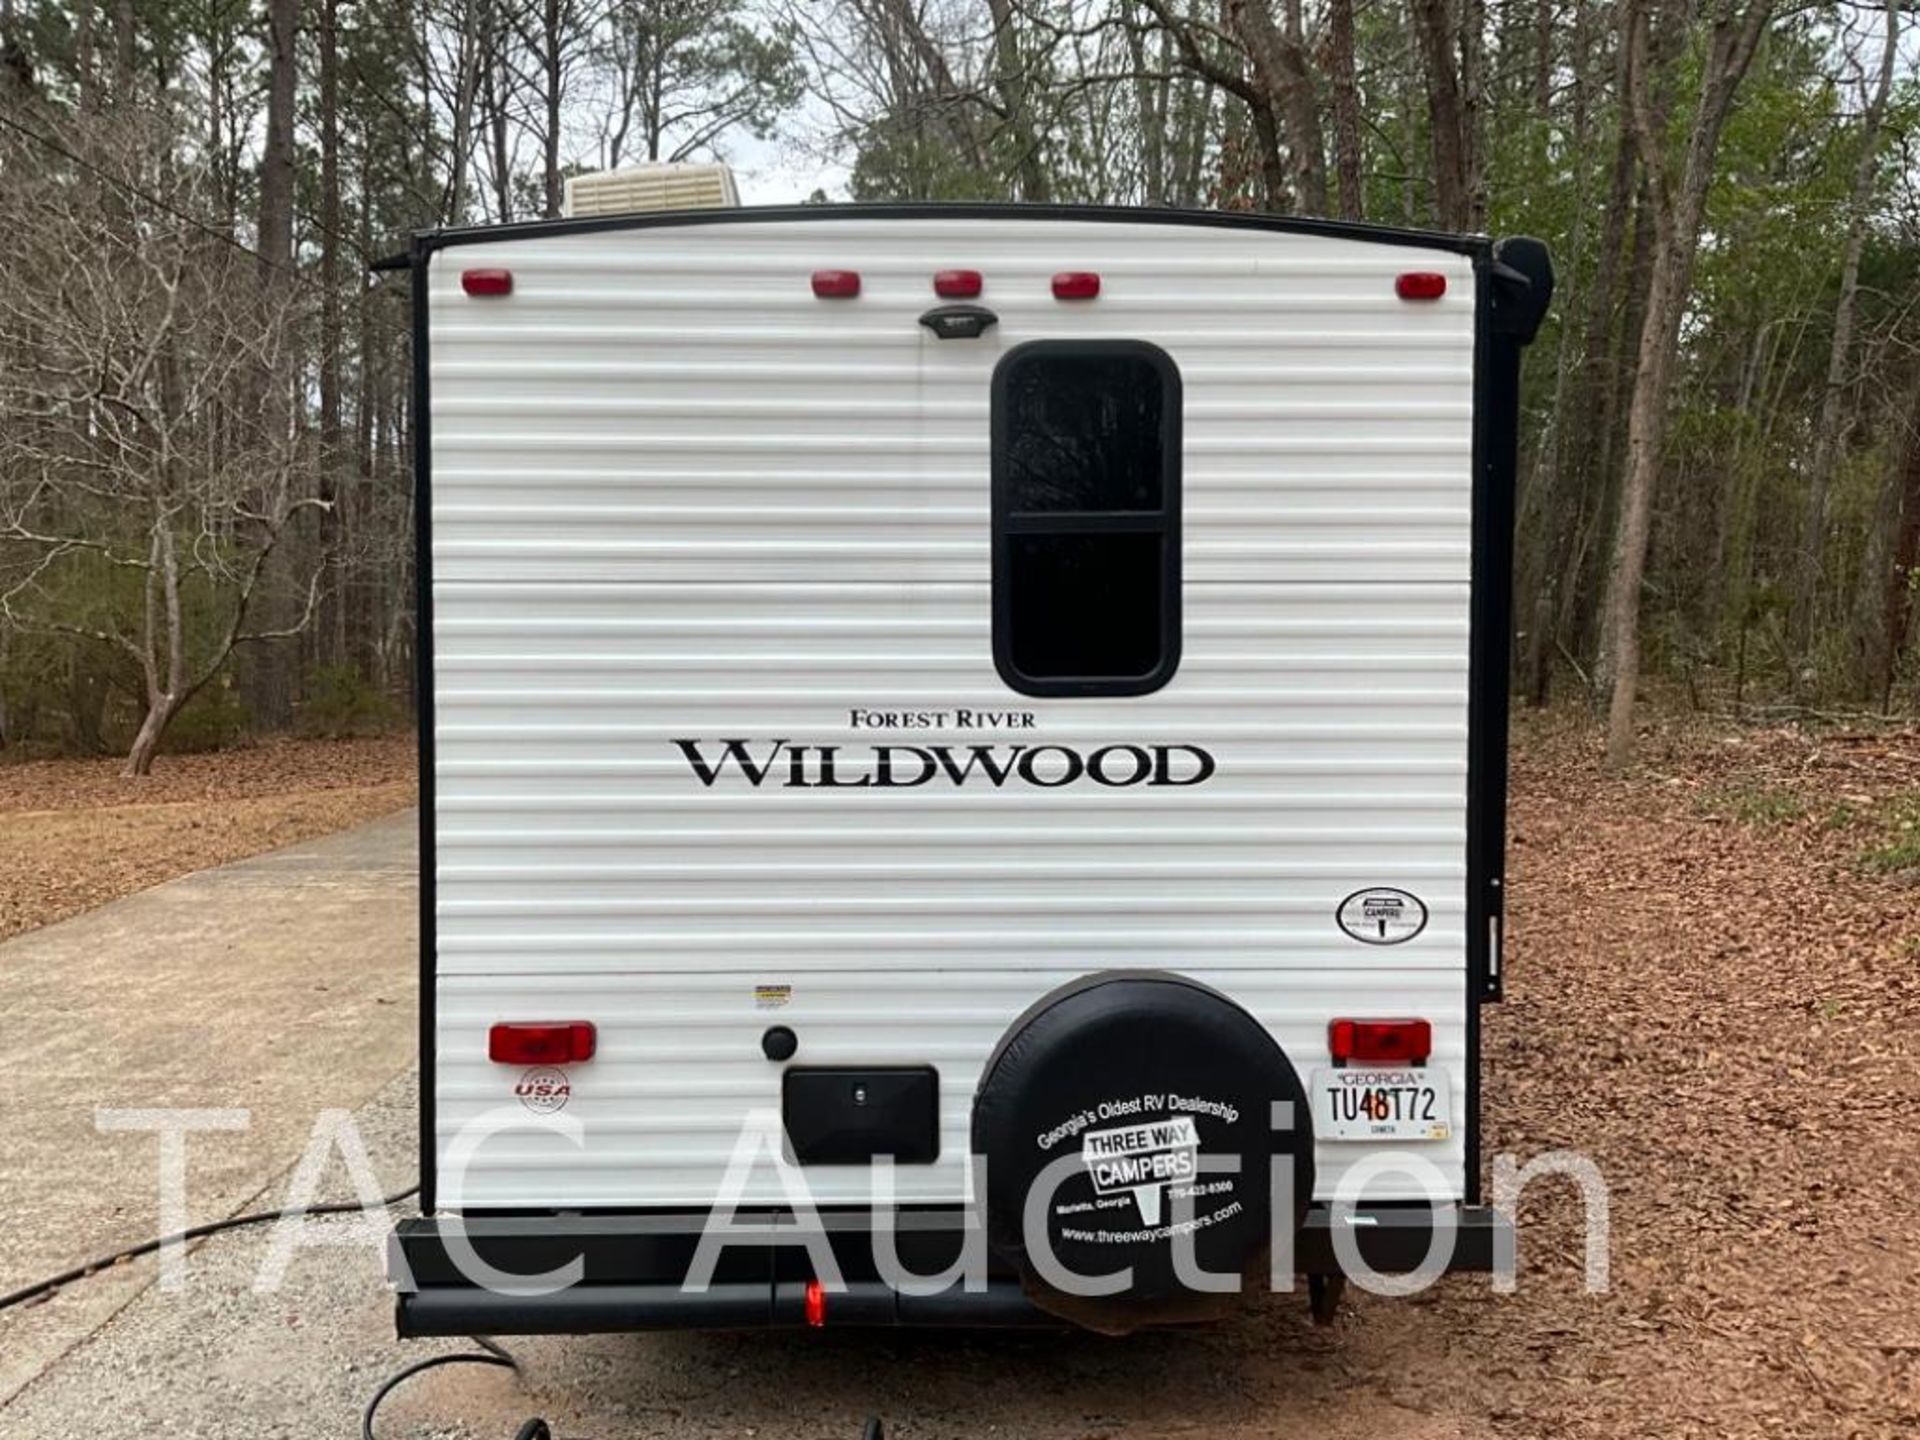 2021 Forest River Wildwood FSX 167RBK Bumper Pull Camper - Image 4 of 85